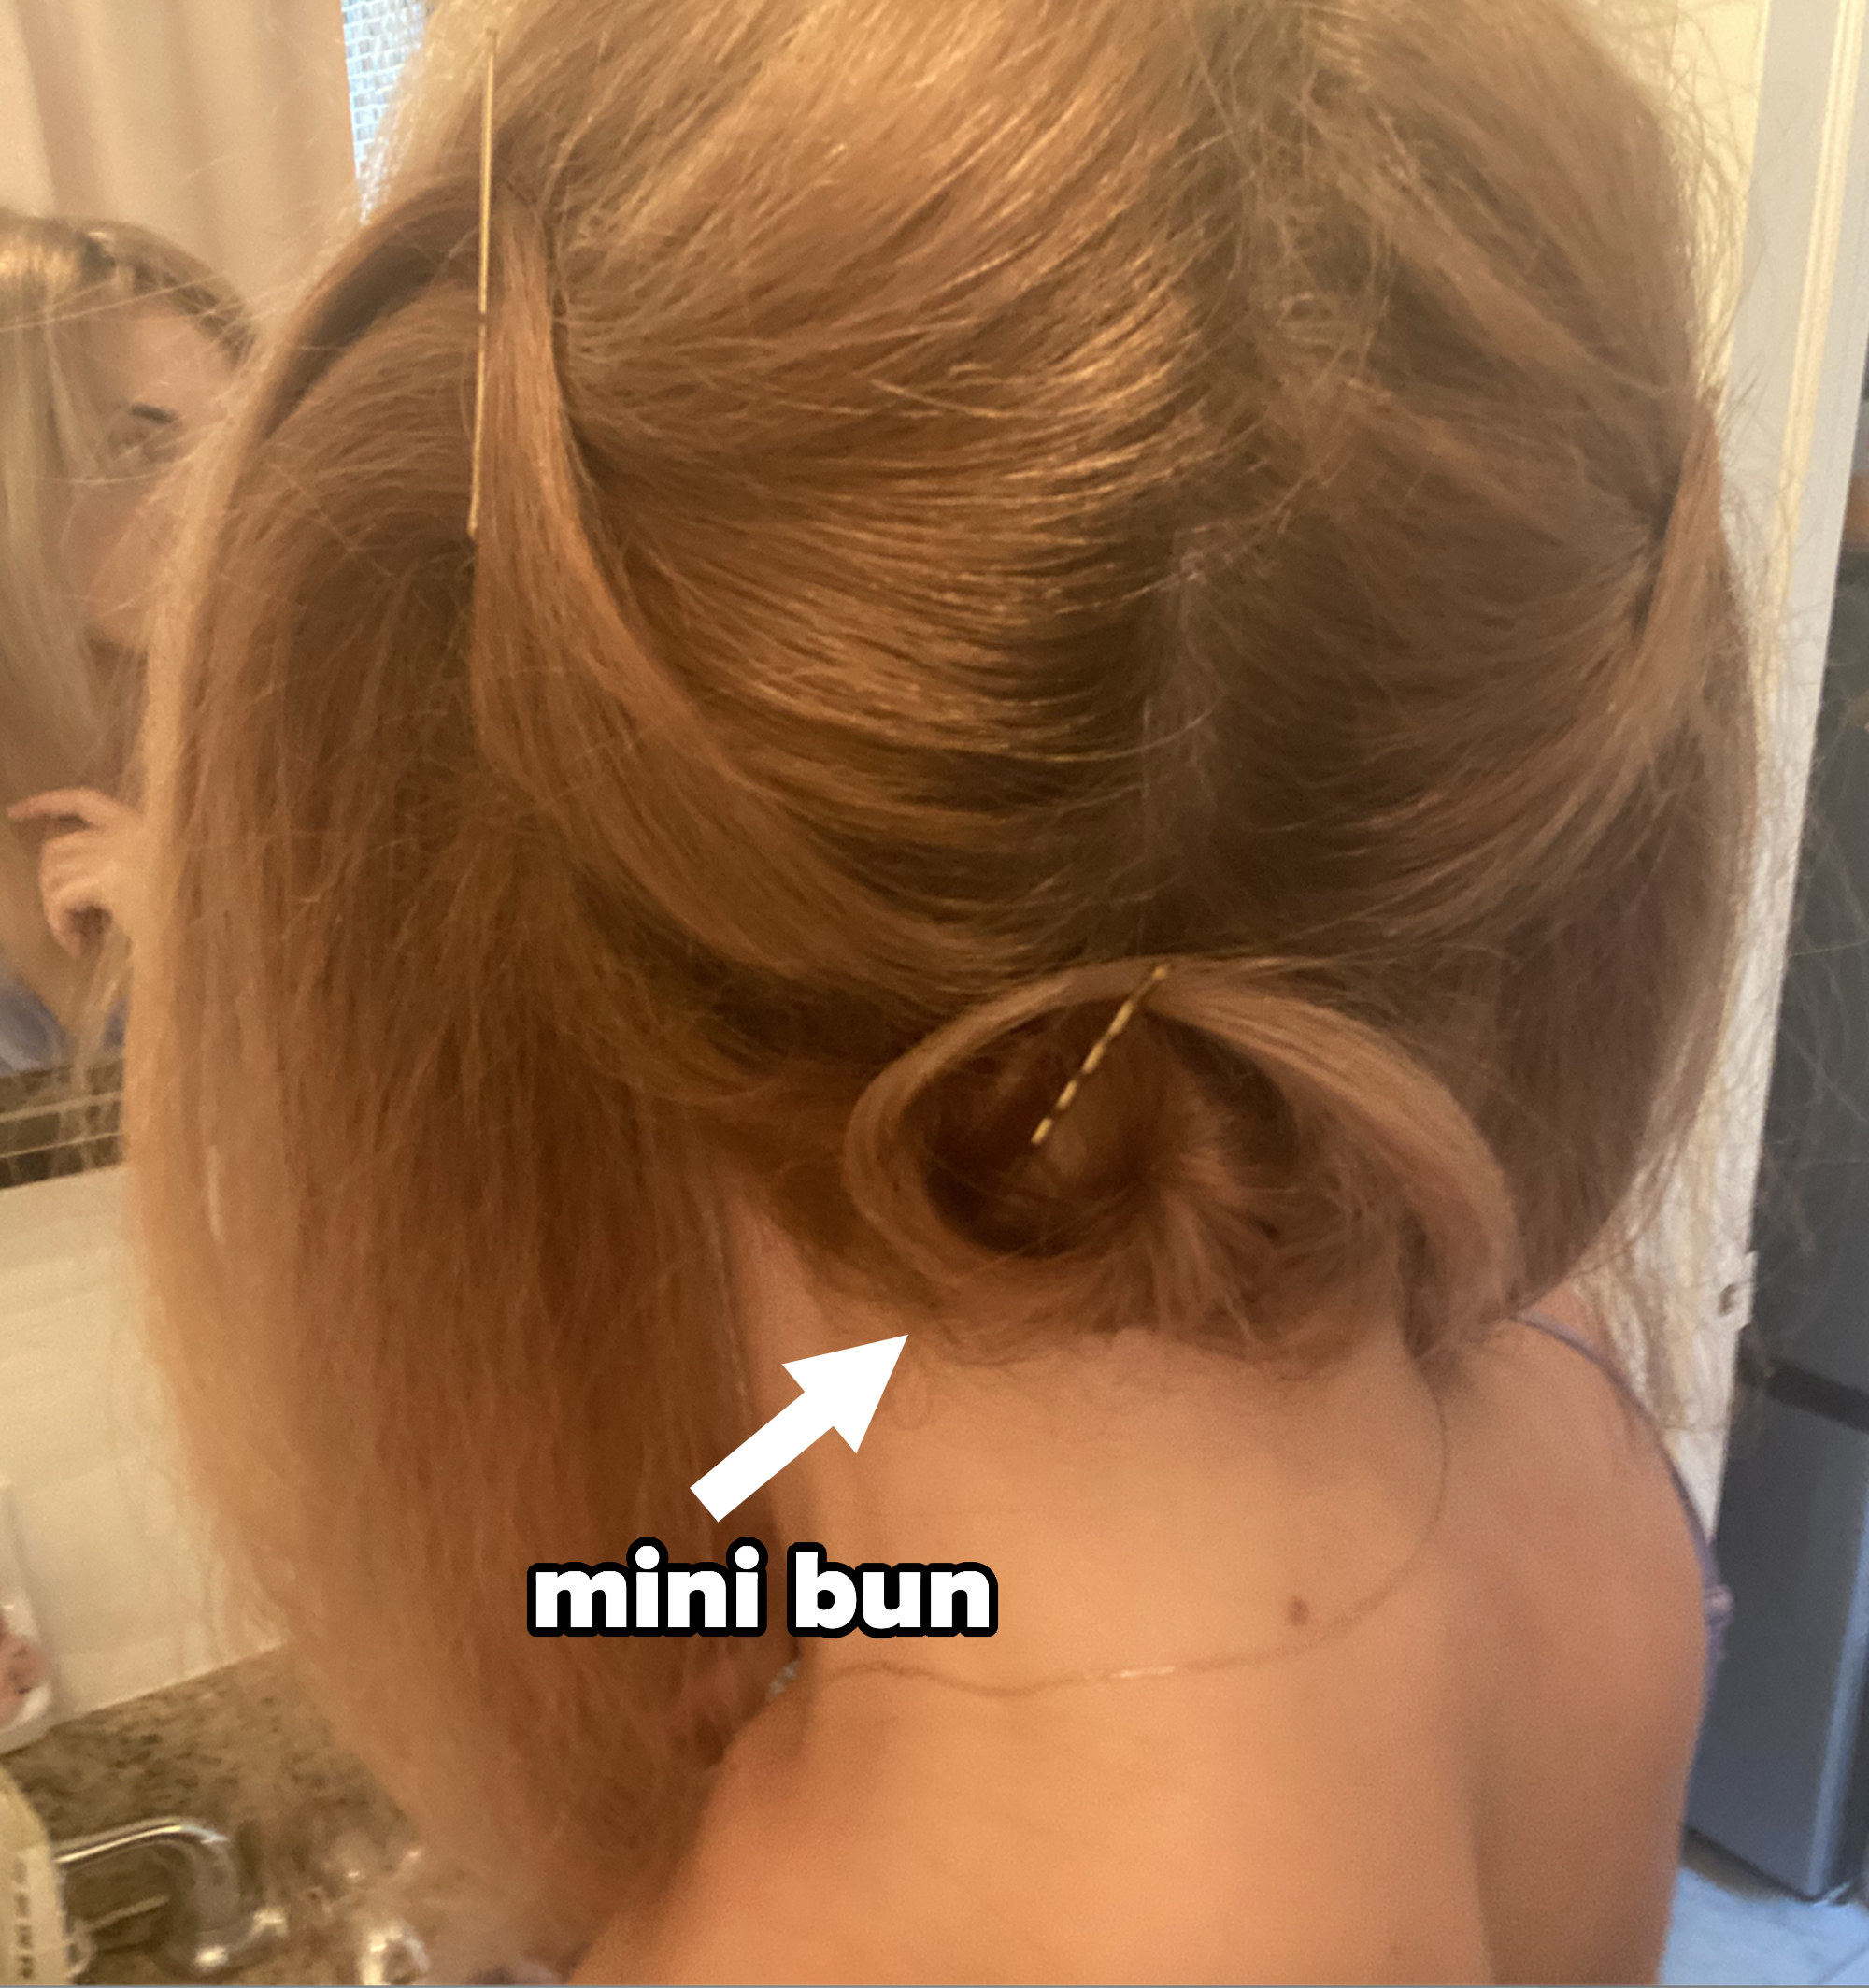 Me with the under-lengths of my hair in a mini bun